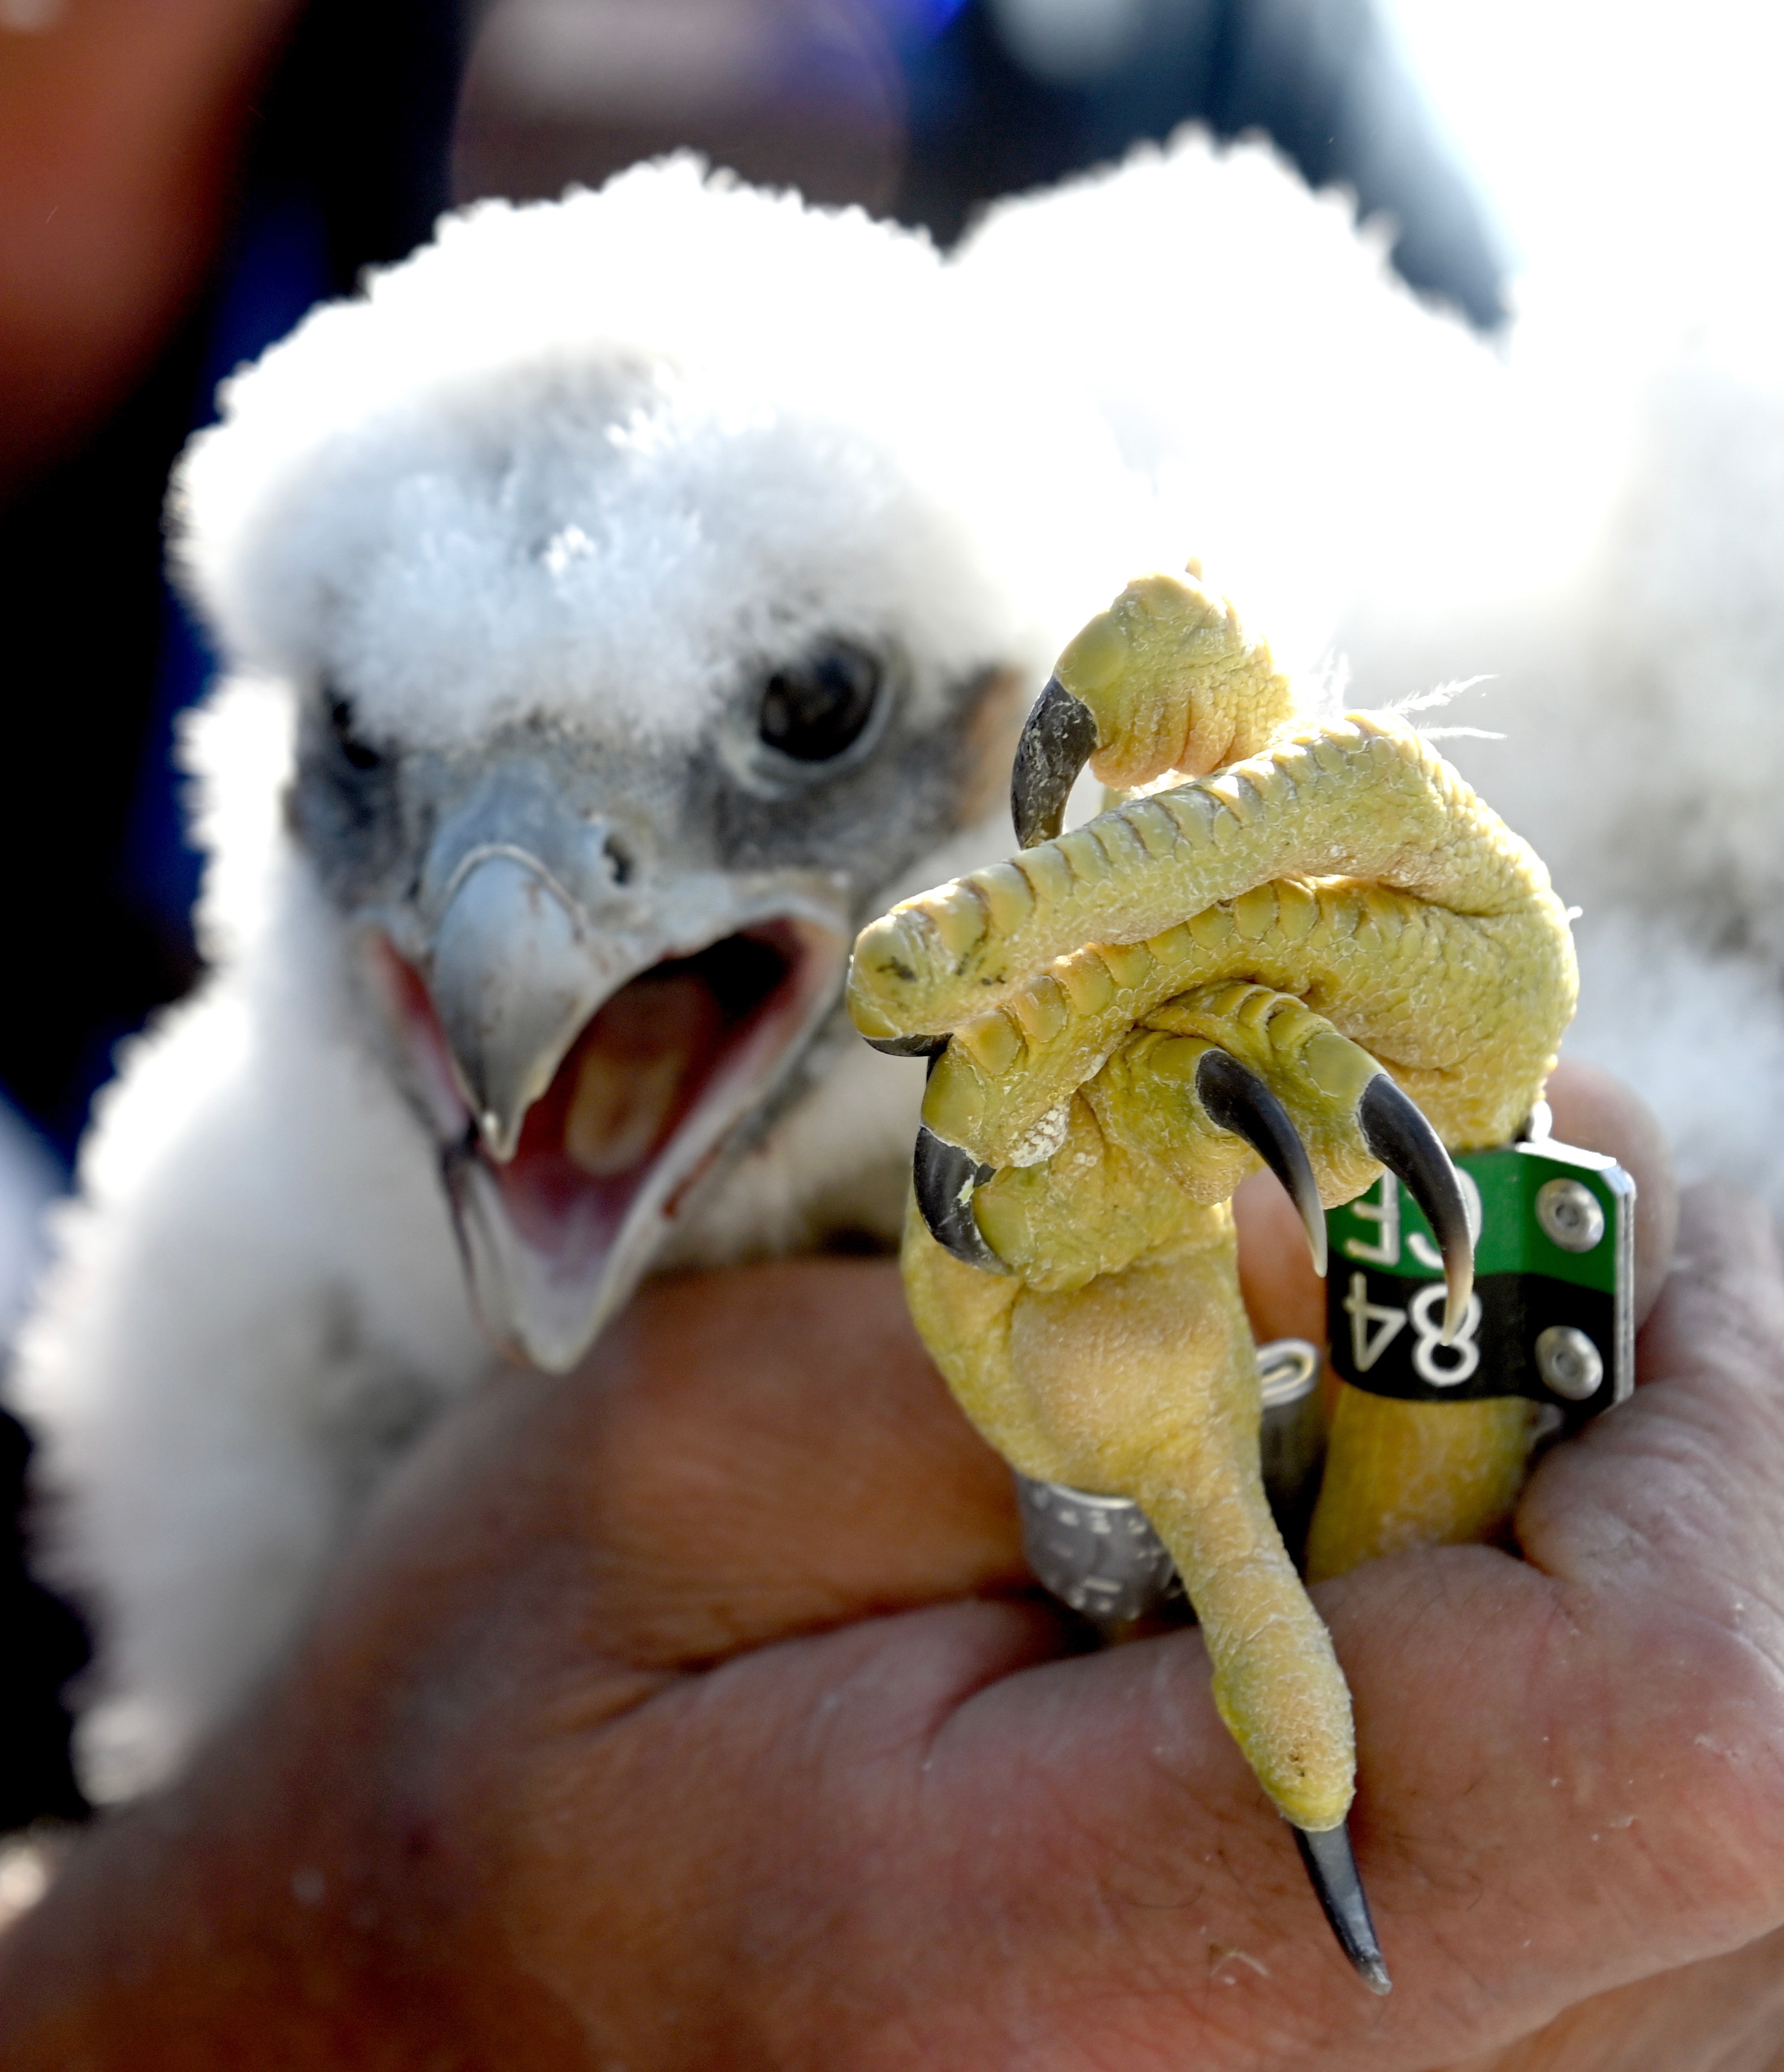 Three Peregrine Falcon Chicks Are Hatched and Banded at MTA Bridges and Tunnels